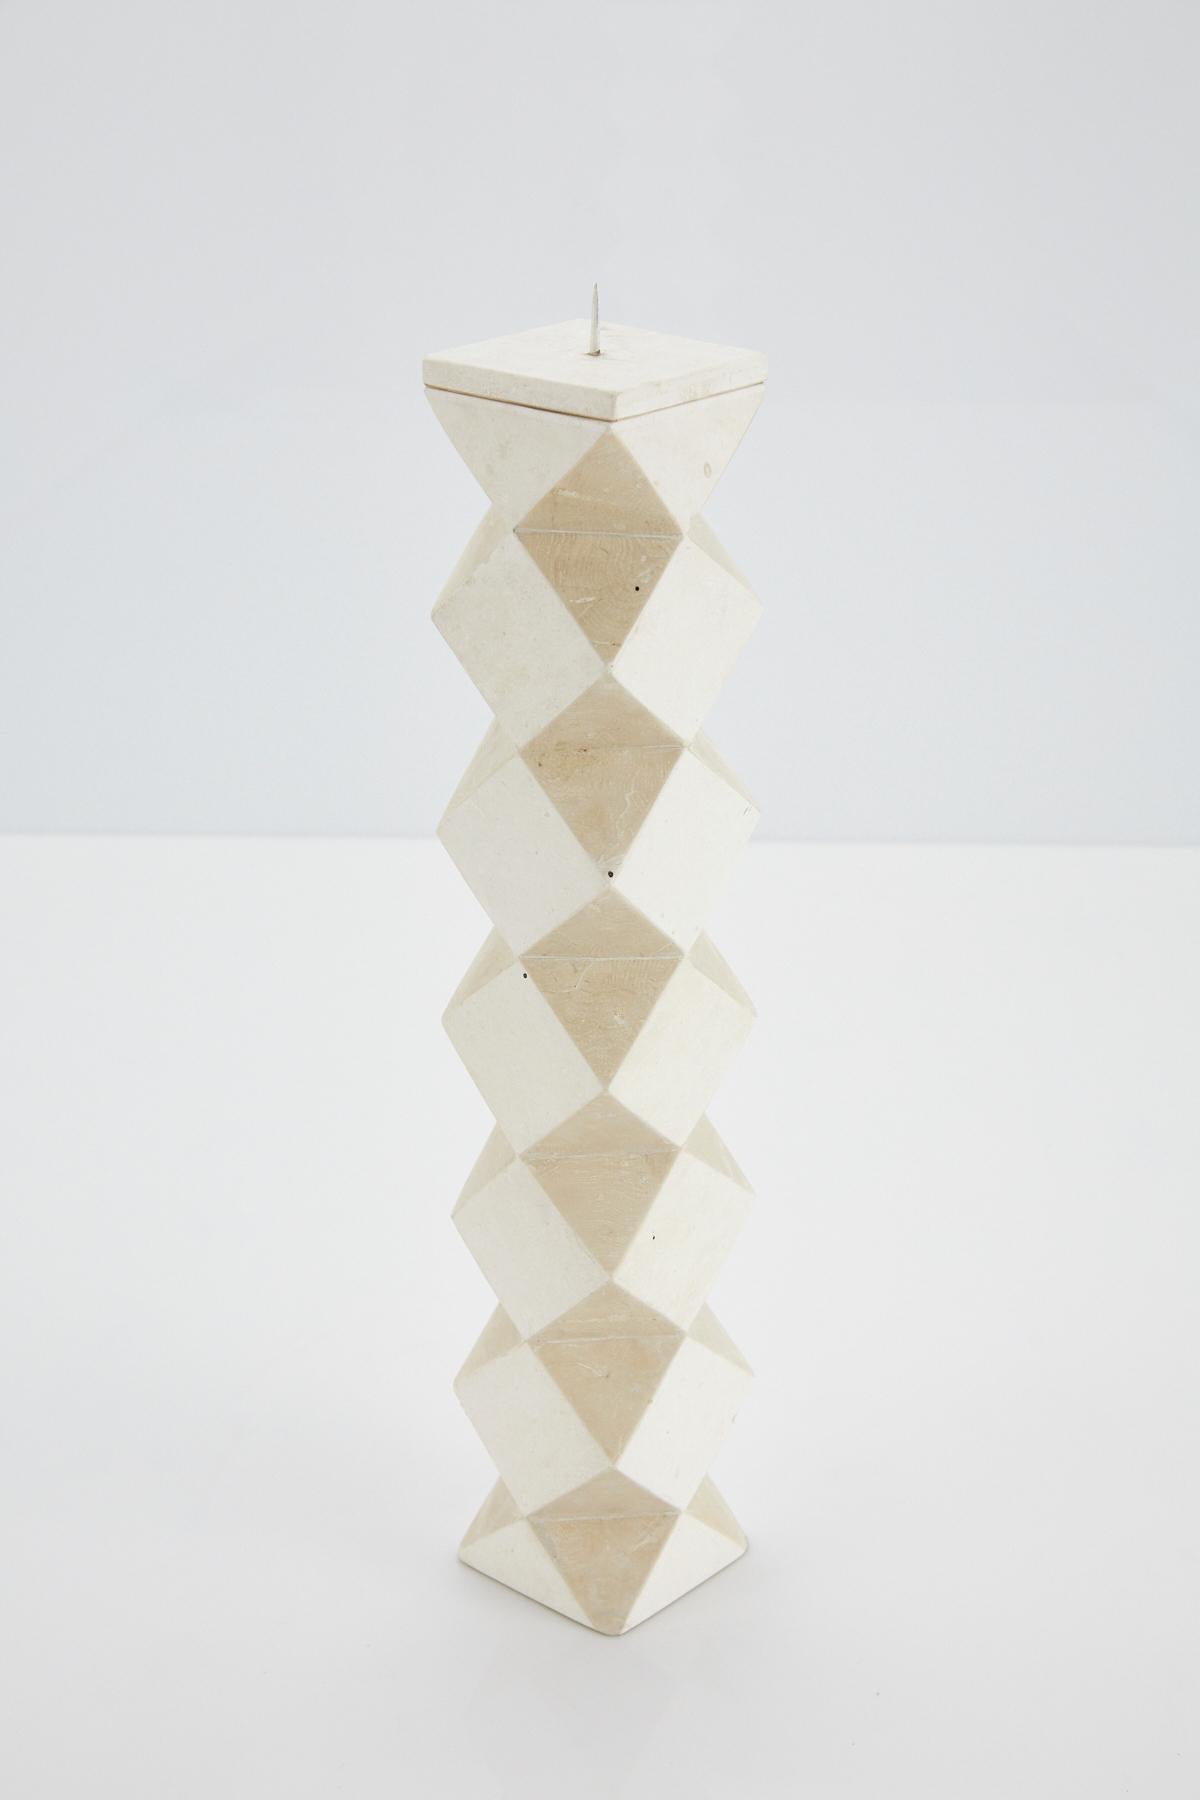 Tall Convertible Faceted Postmodern Tessellated Stone Candlestick or Vase, 1990s im Zustand „Hervorragend“ im Angebot in Los Angeles, CA